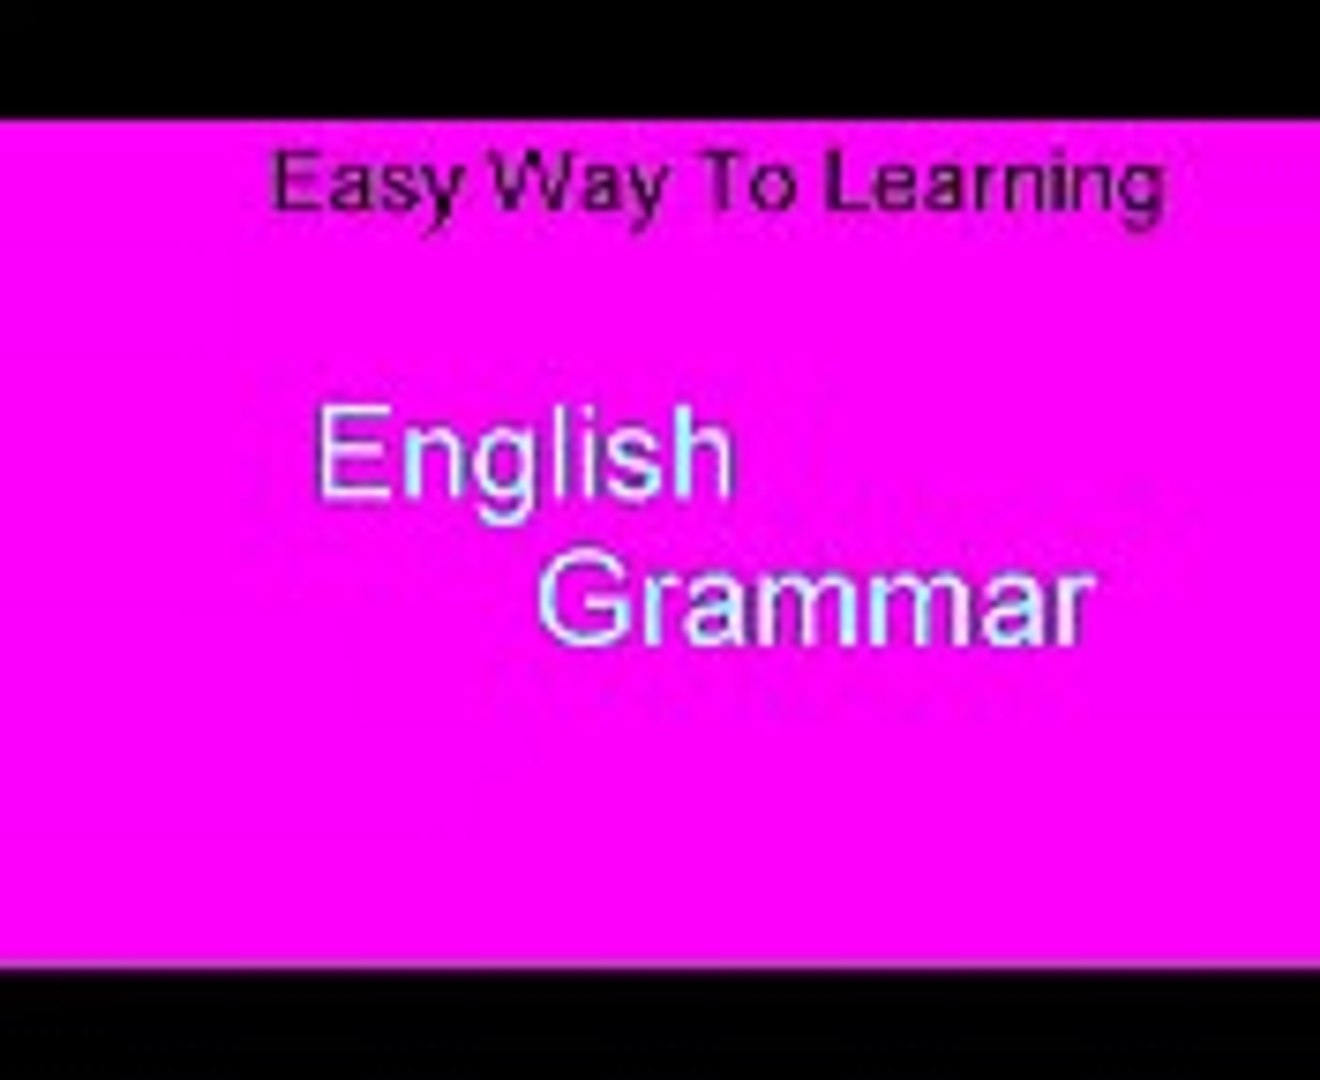 14 - How latest Plurals Are Formed In English Grammar In English And Urdu Languages 2017 by Dailyfan